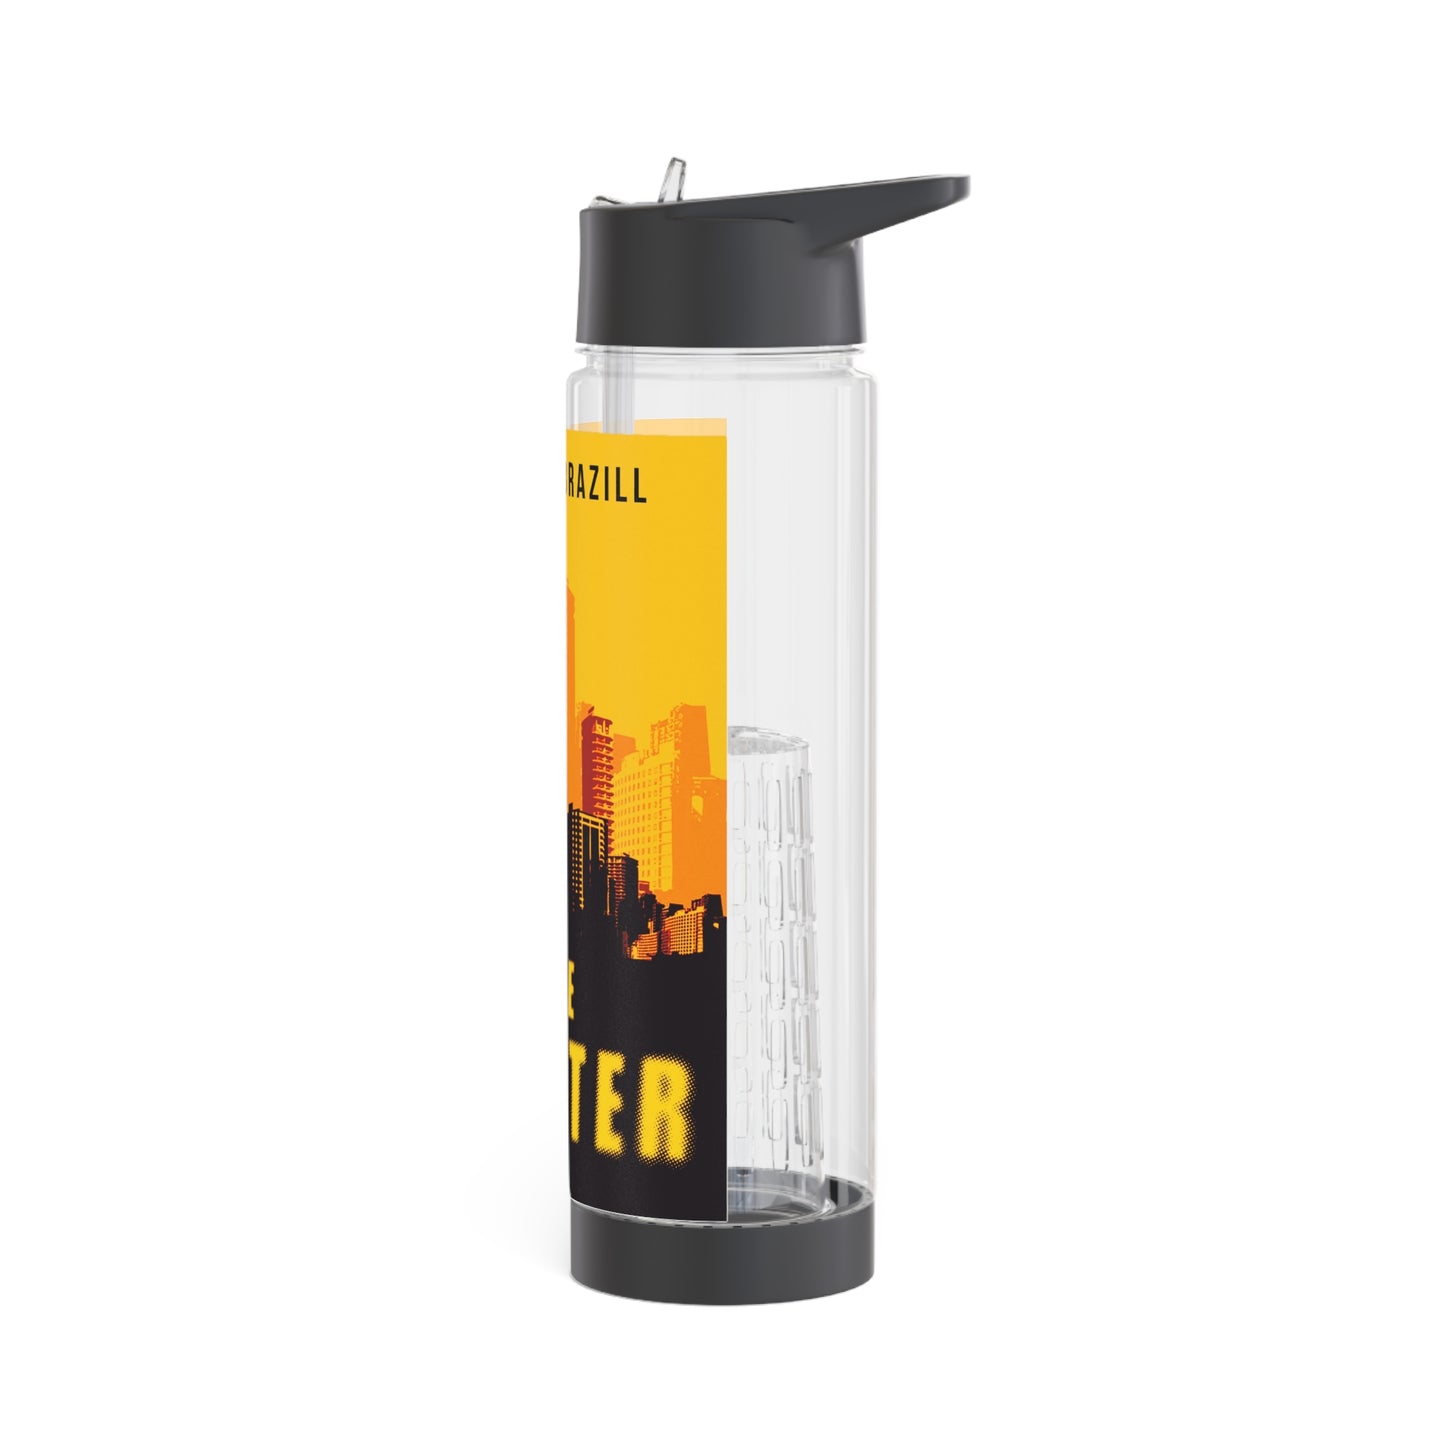 The Grifter - Infuser Water Bottle